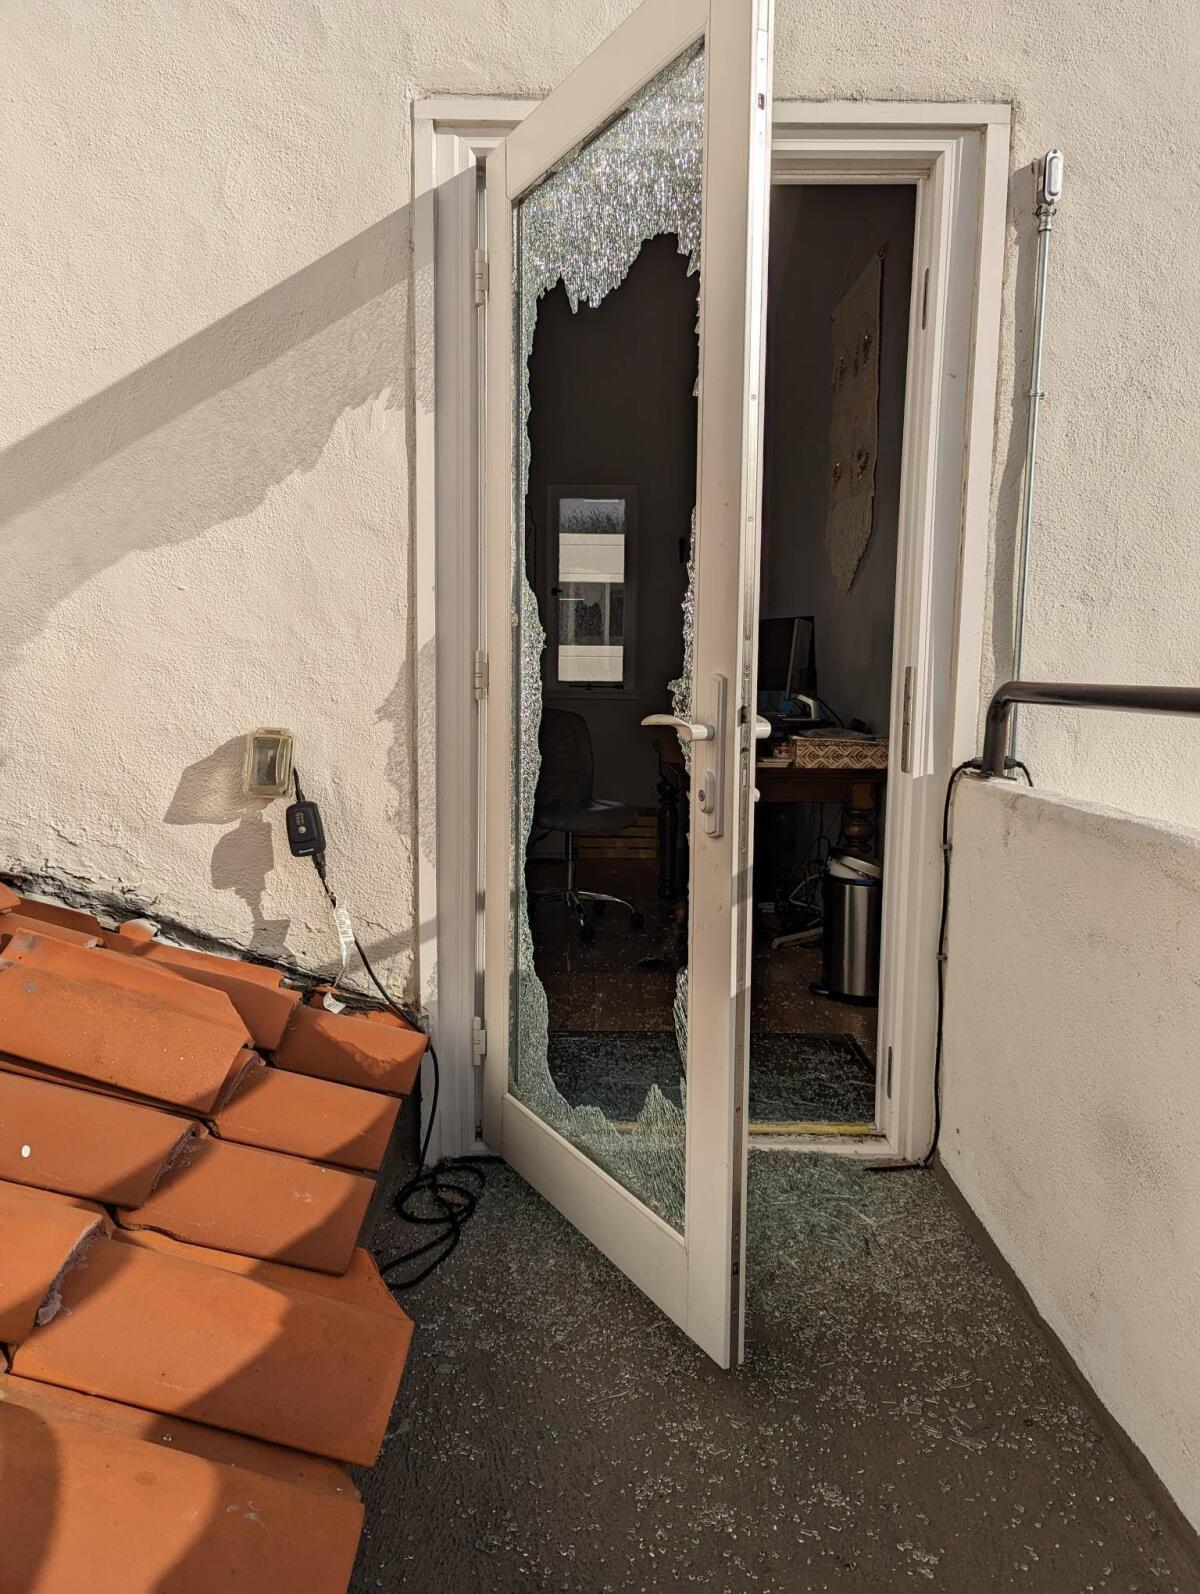 A glass door leading to a pastor's office at Costa Mesa First United Methodist Church was broken Saturday in a burglary.